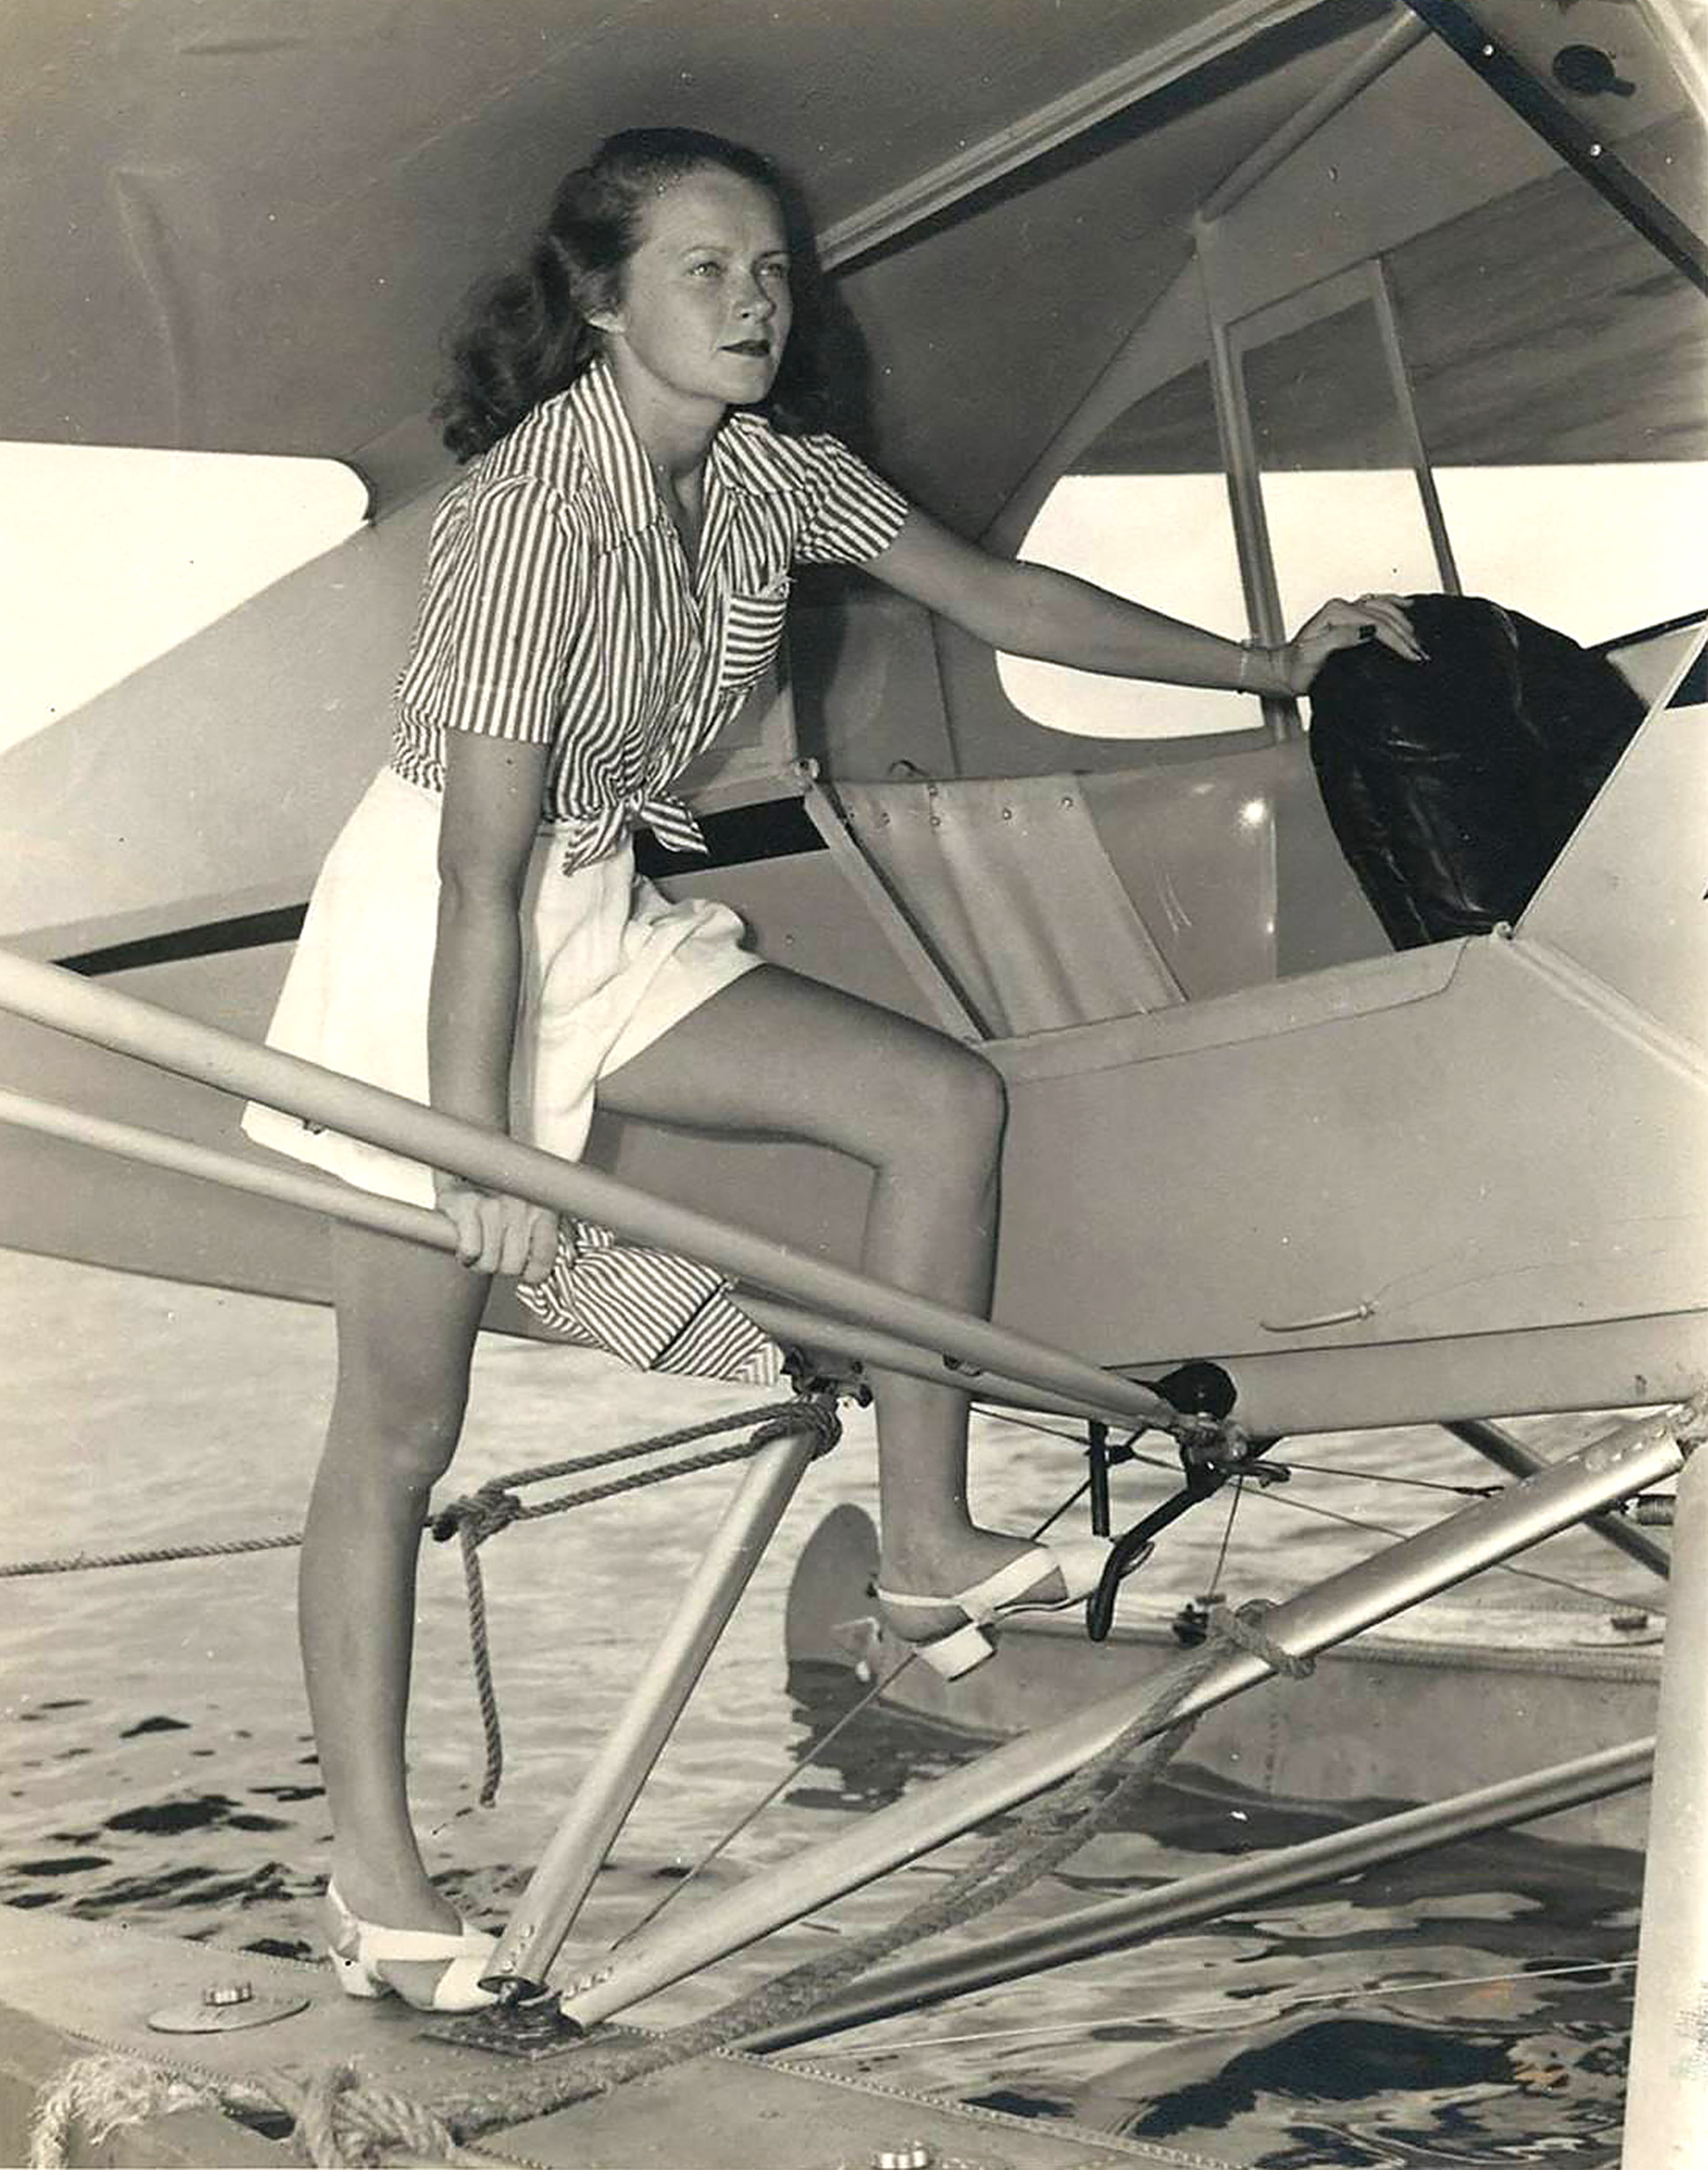 Embry-Riddle pilot Corinne Smith flew the same Piper Cub floatplane on the same day that John F. Kennedy took training in it during the spring of 1944 in Miami. Photo courtesy of Embry-Riddle Aeronautical University.